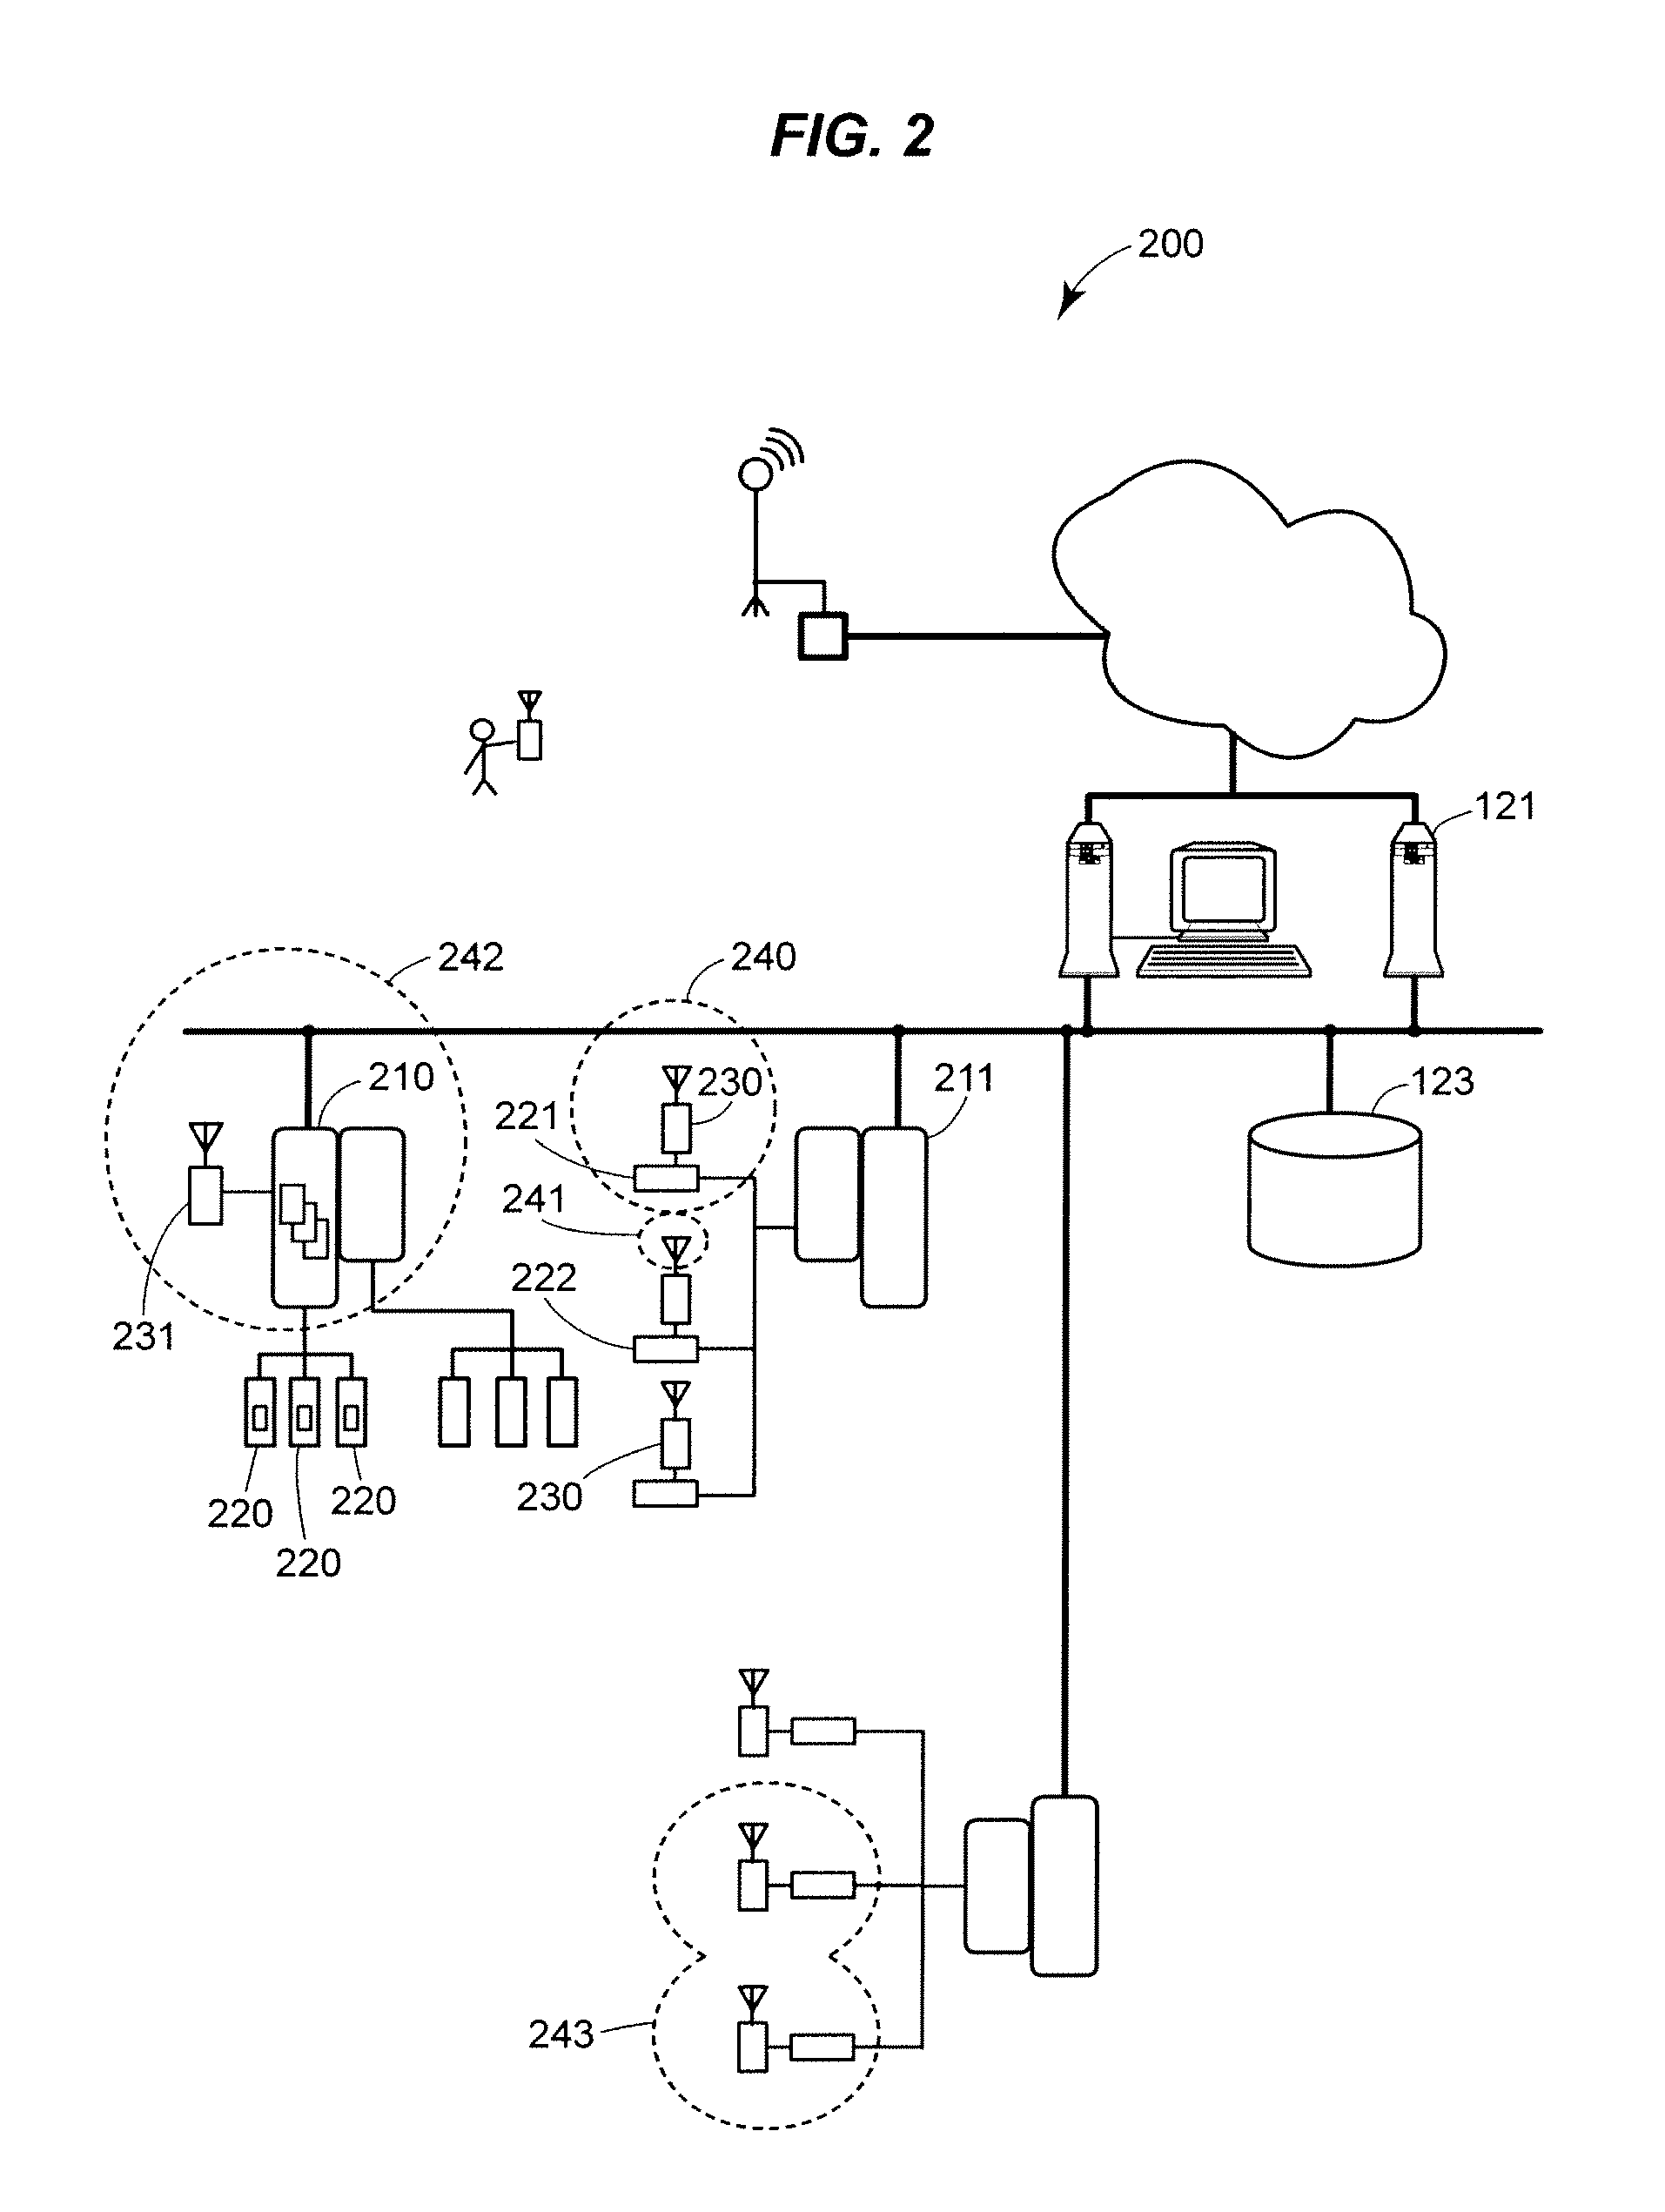 Location Dependent Control Access in a Process Control System